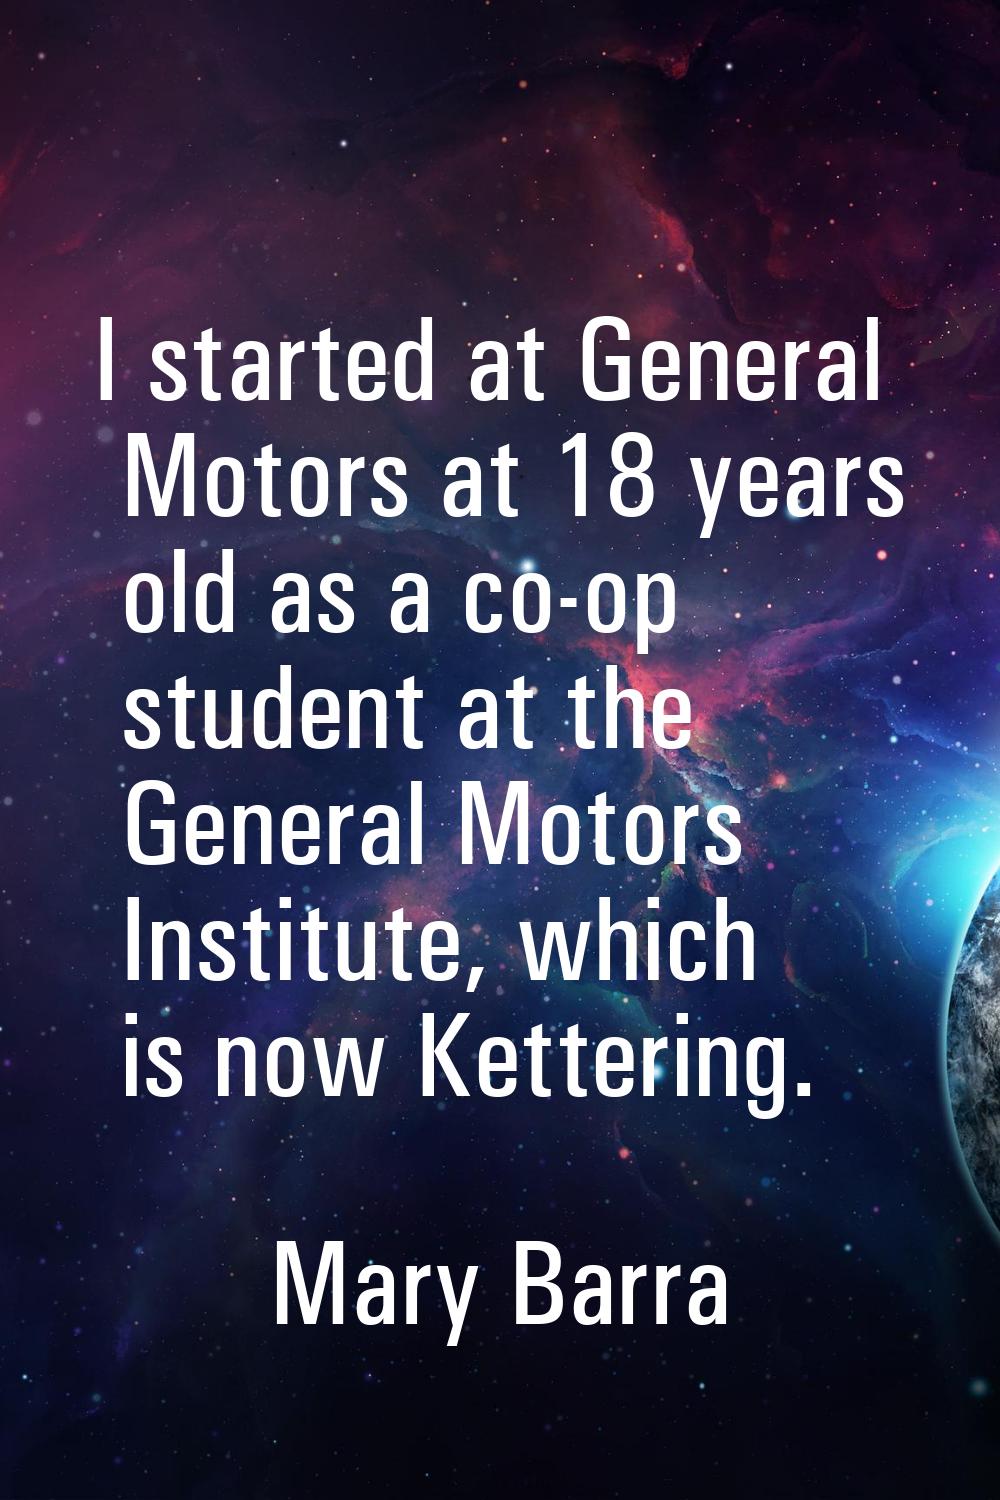 I started at General Motors at 18 years old as a co-op student at the General Motors Institute, whi